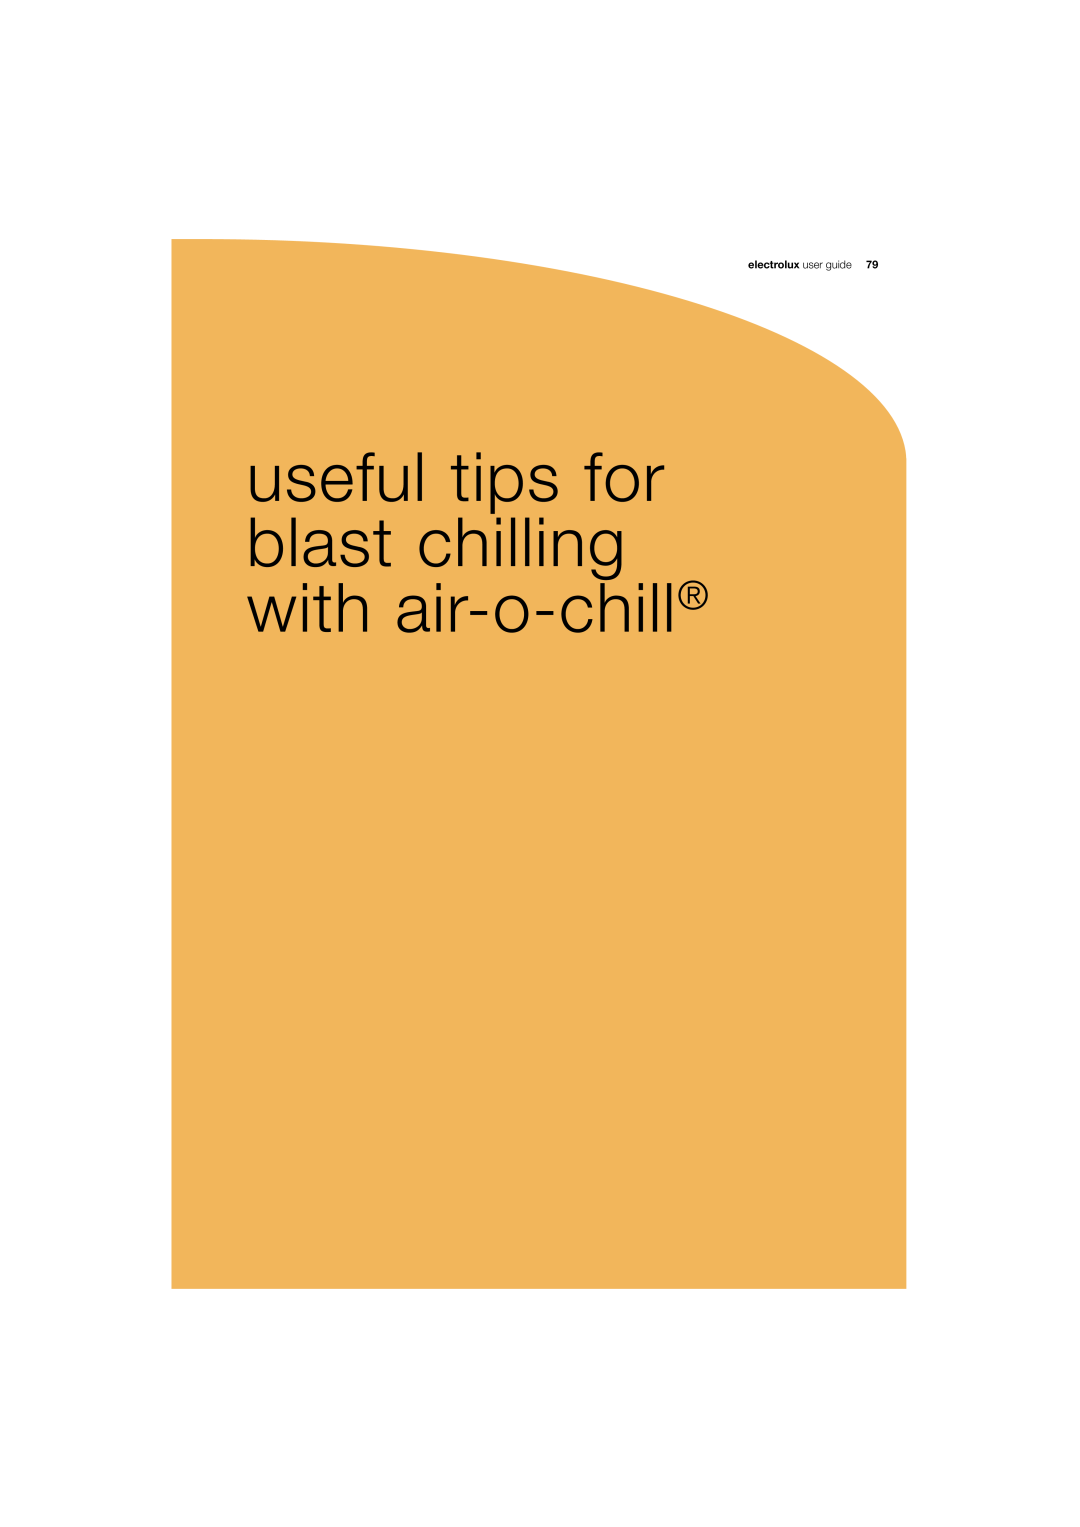 Electrolux 180 manual useful tips for blast chilling with air-o-chill, electrolux user guide 